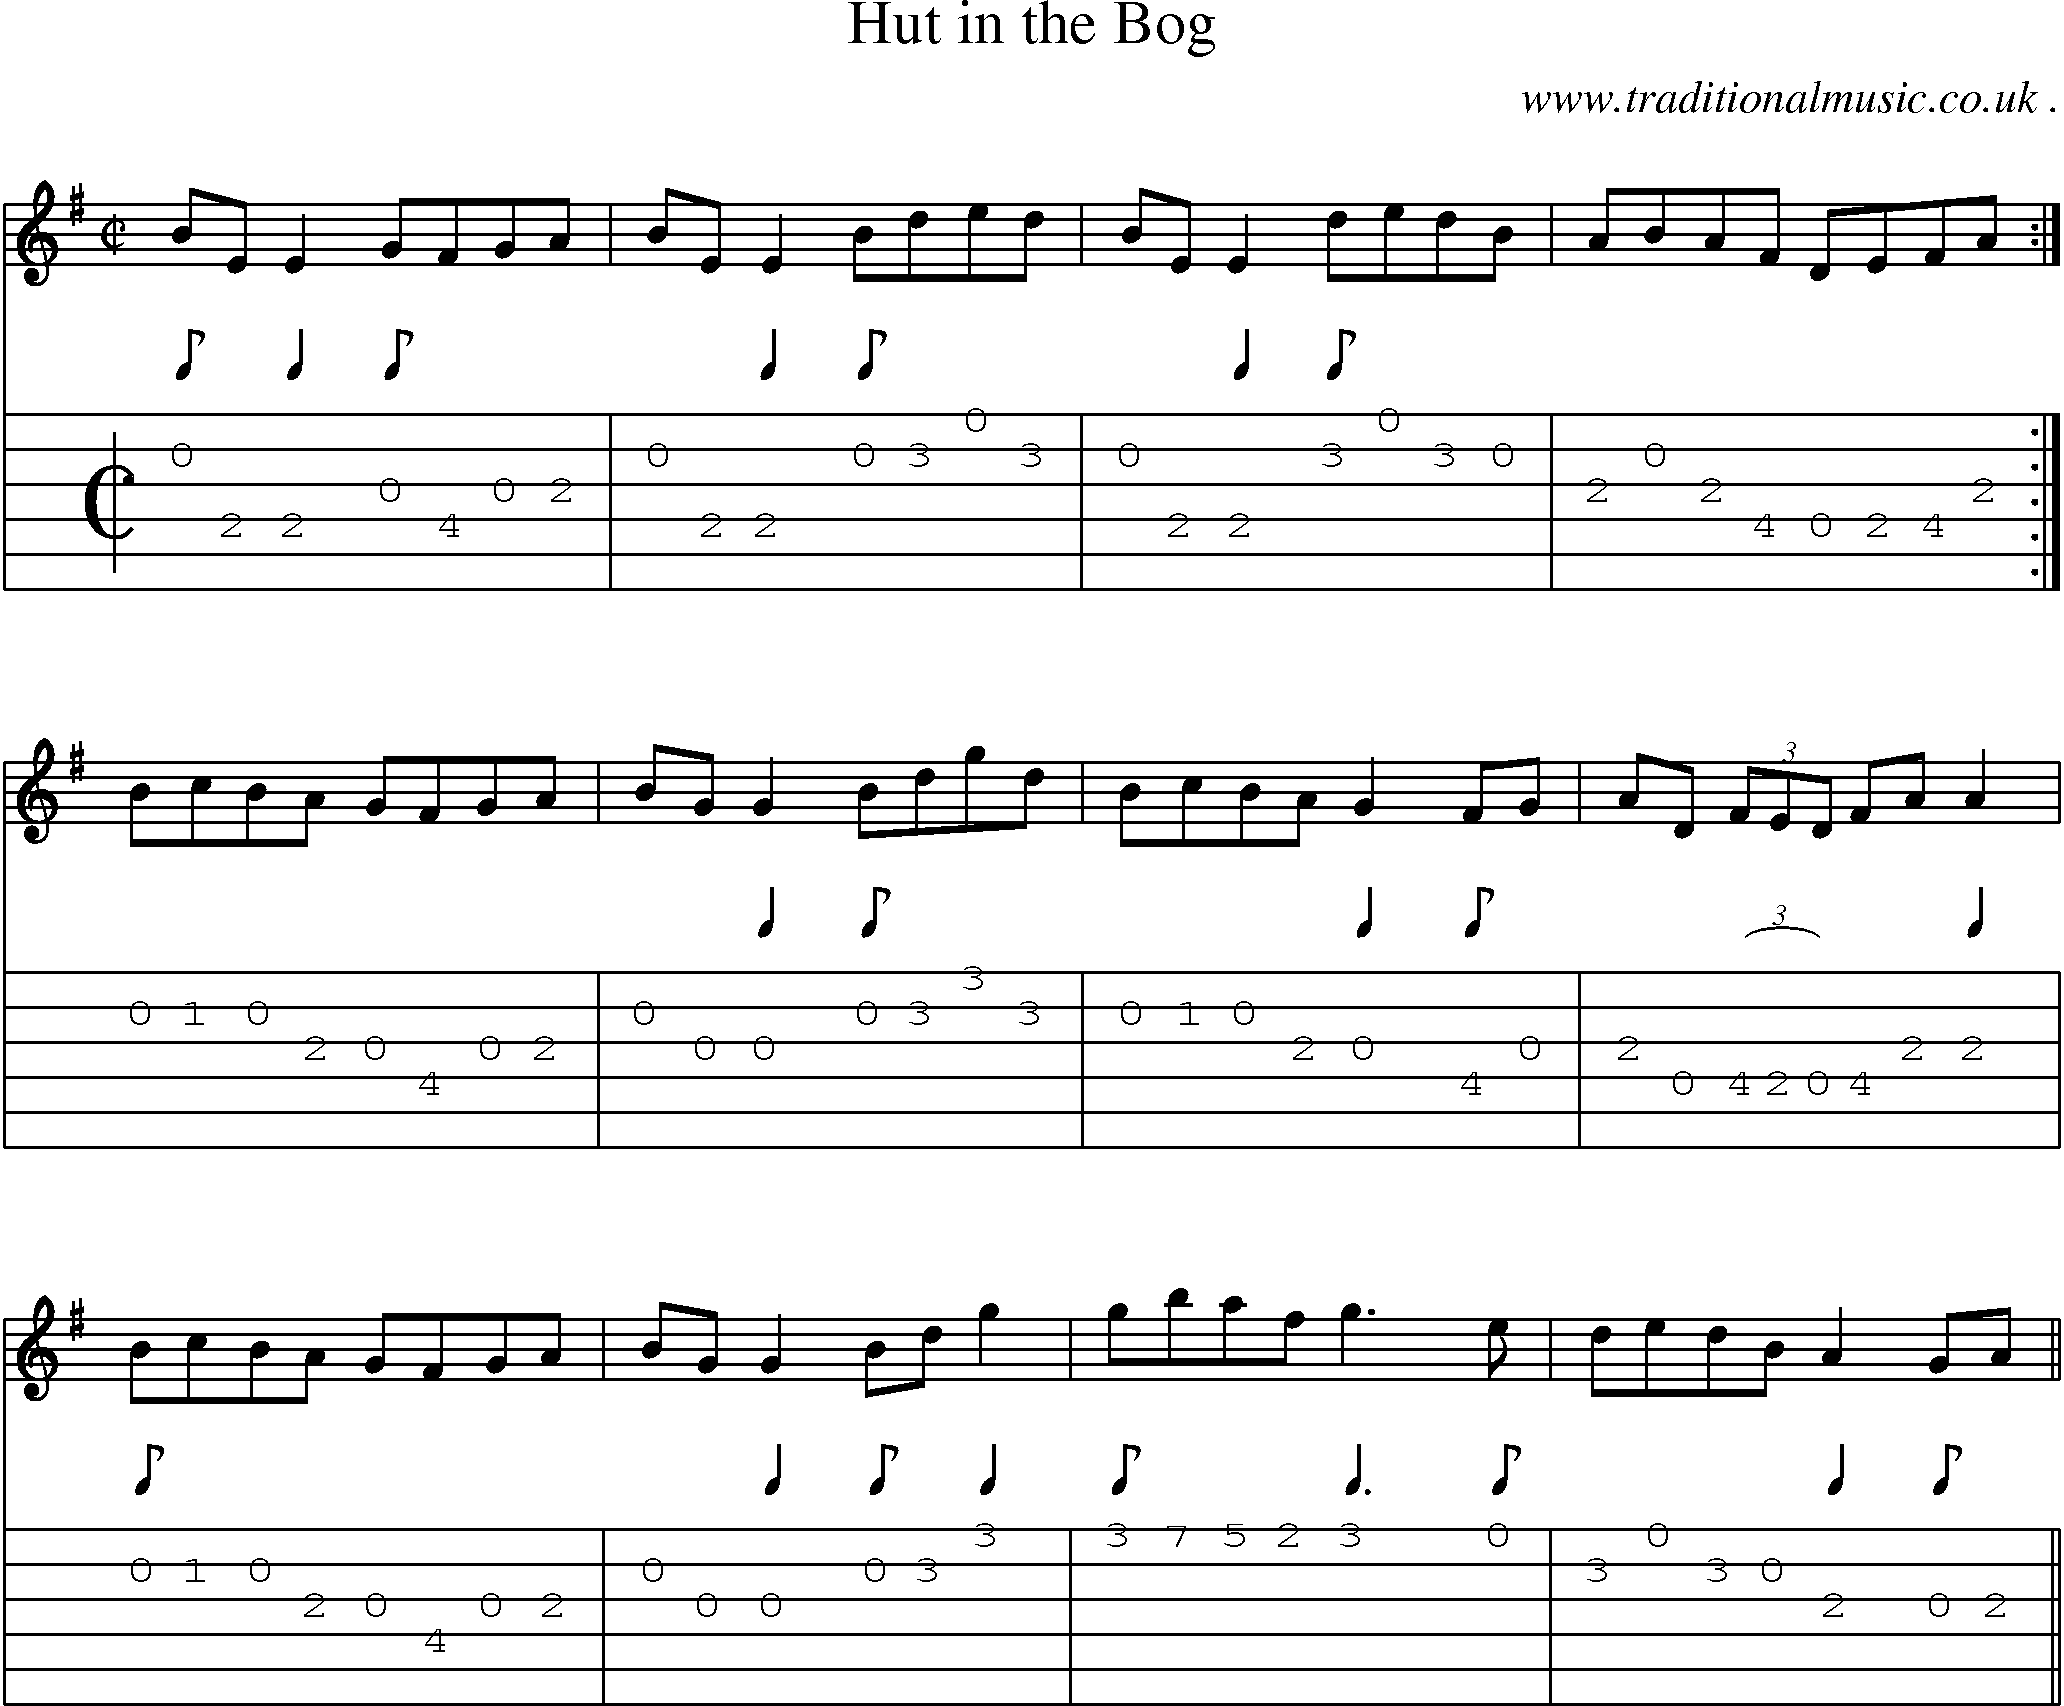 Sheet-Music and Guitar Tabs for Hut In The Bog